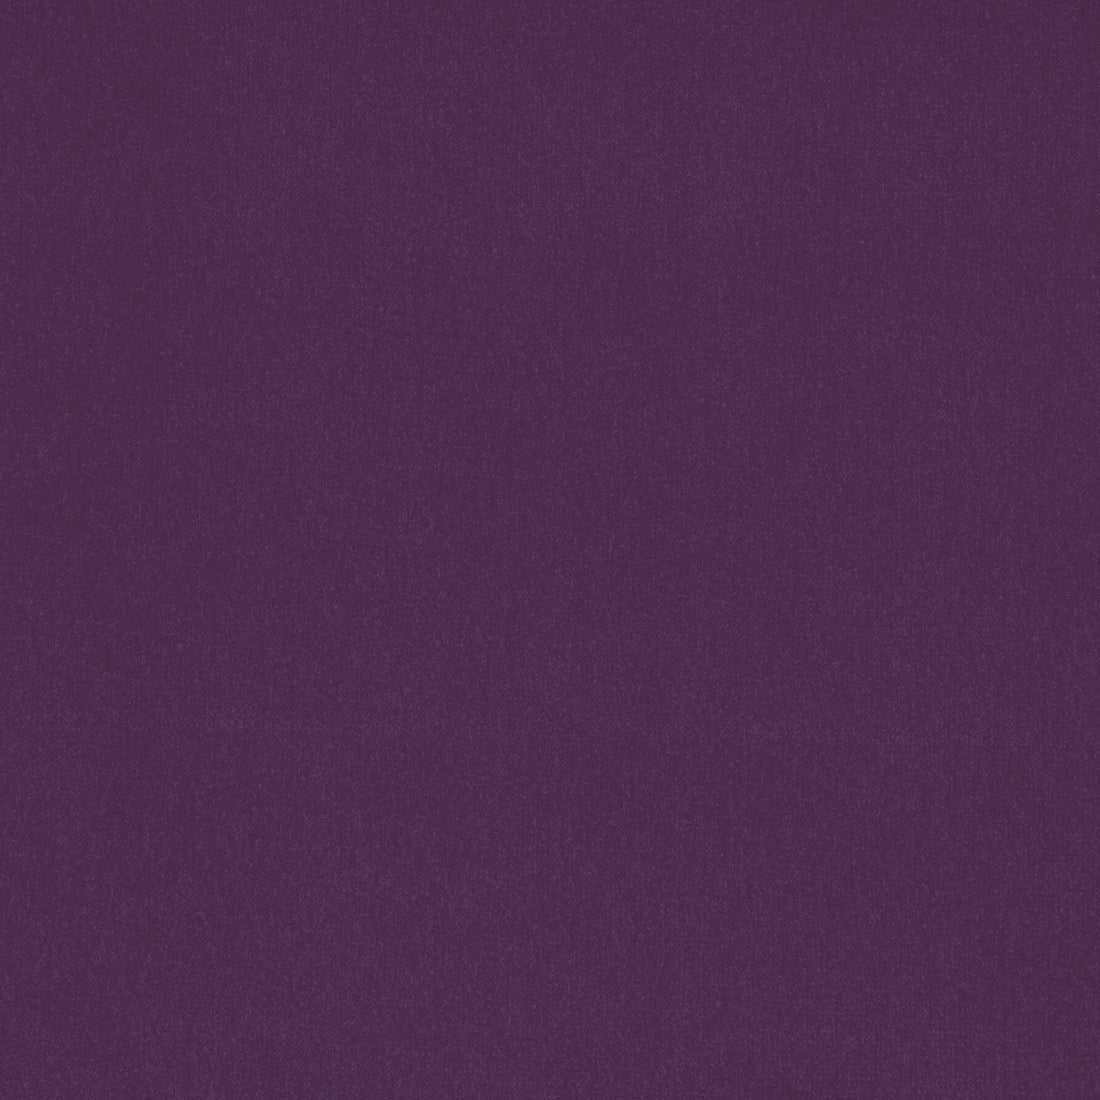 Alto Velvet fabric in amethyst color - pattern number W8931 - by Thibaut in the Lyra Velvets collection